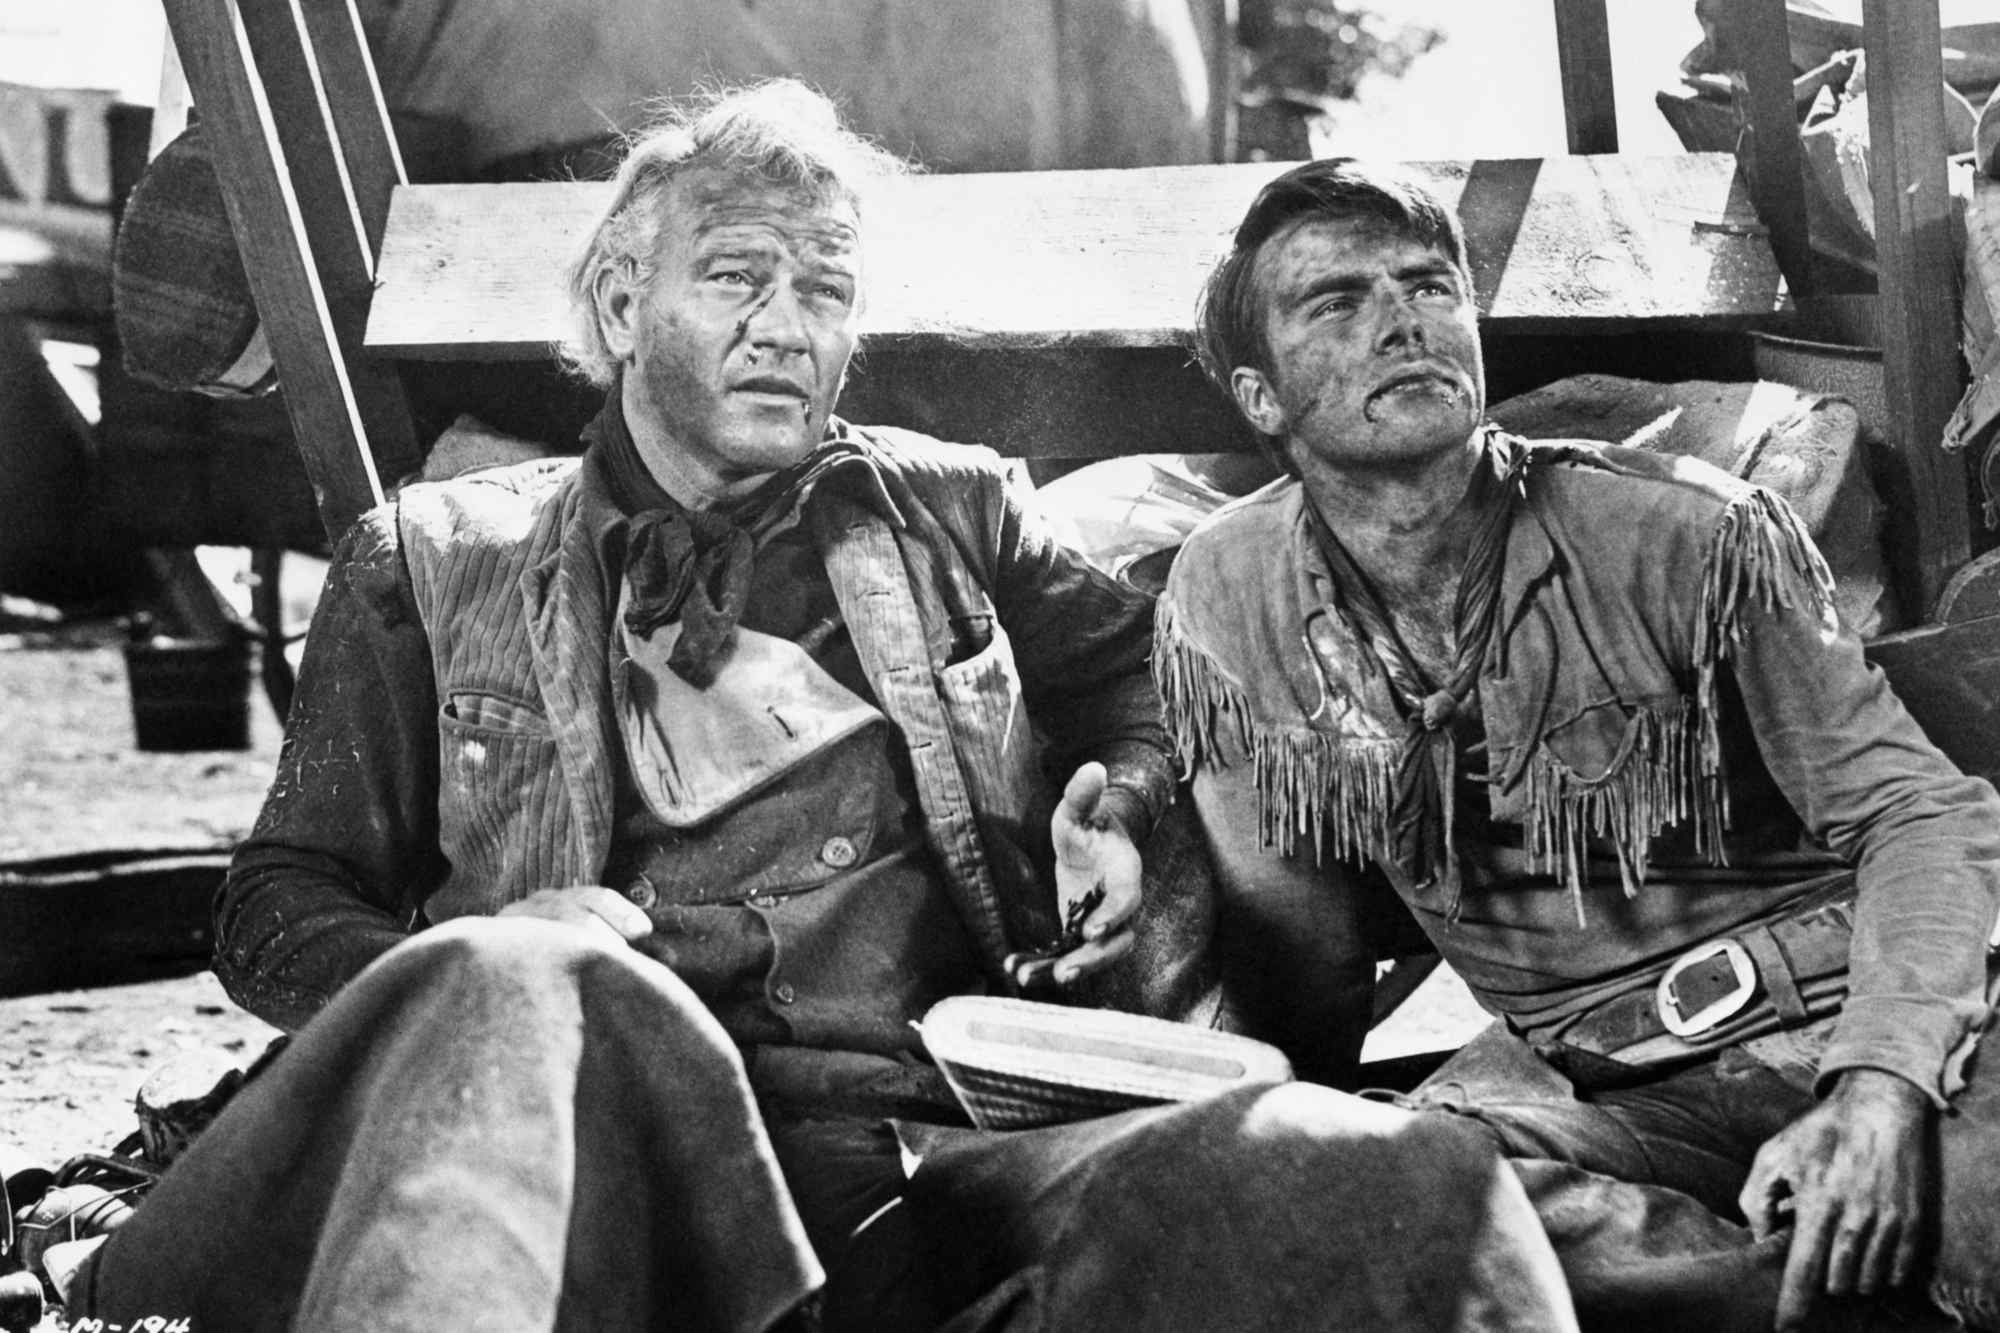 'Red River' John Wayne as Thomas Dunson and Montgomery Clift as Matt Garth sitting next to each other, covered in dirt